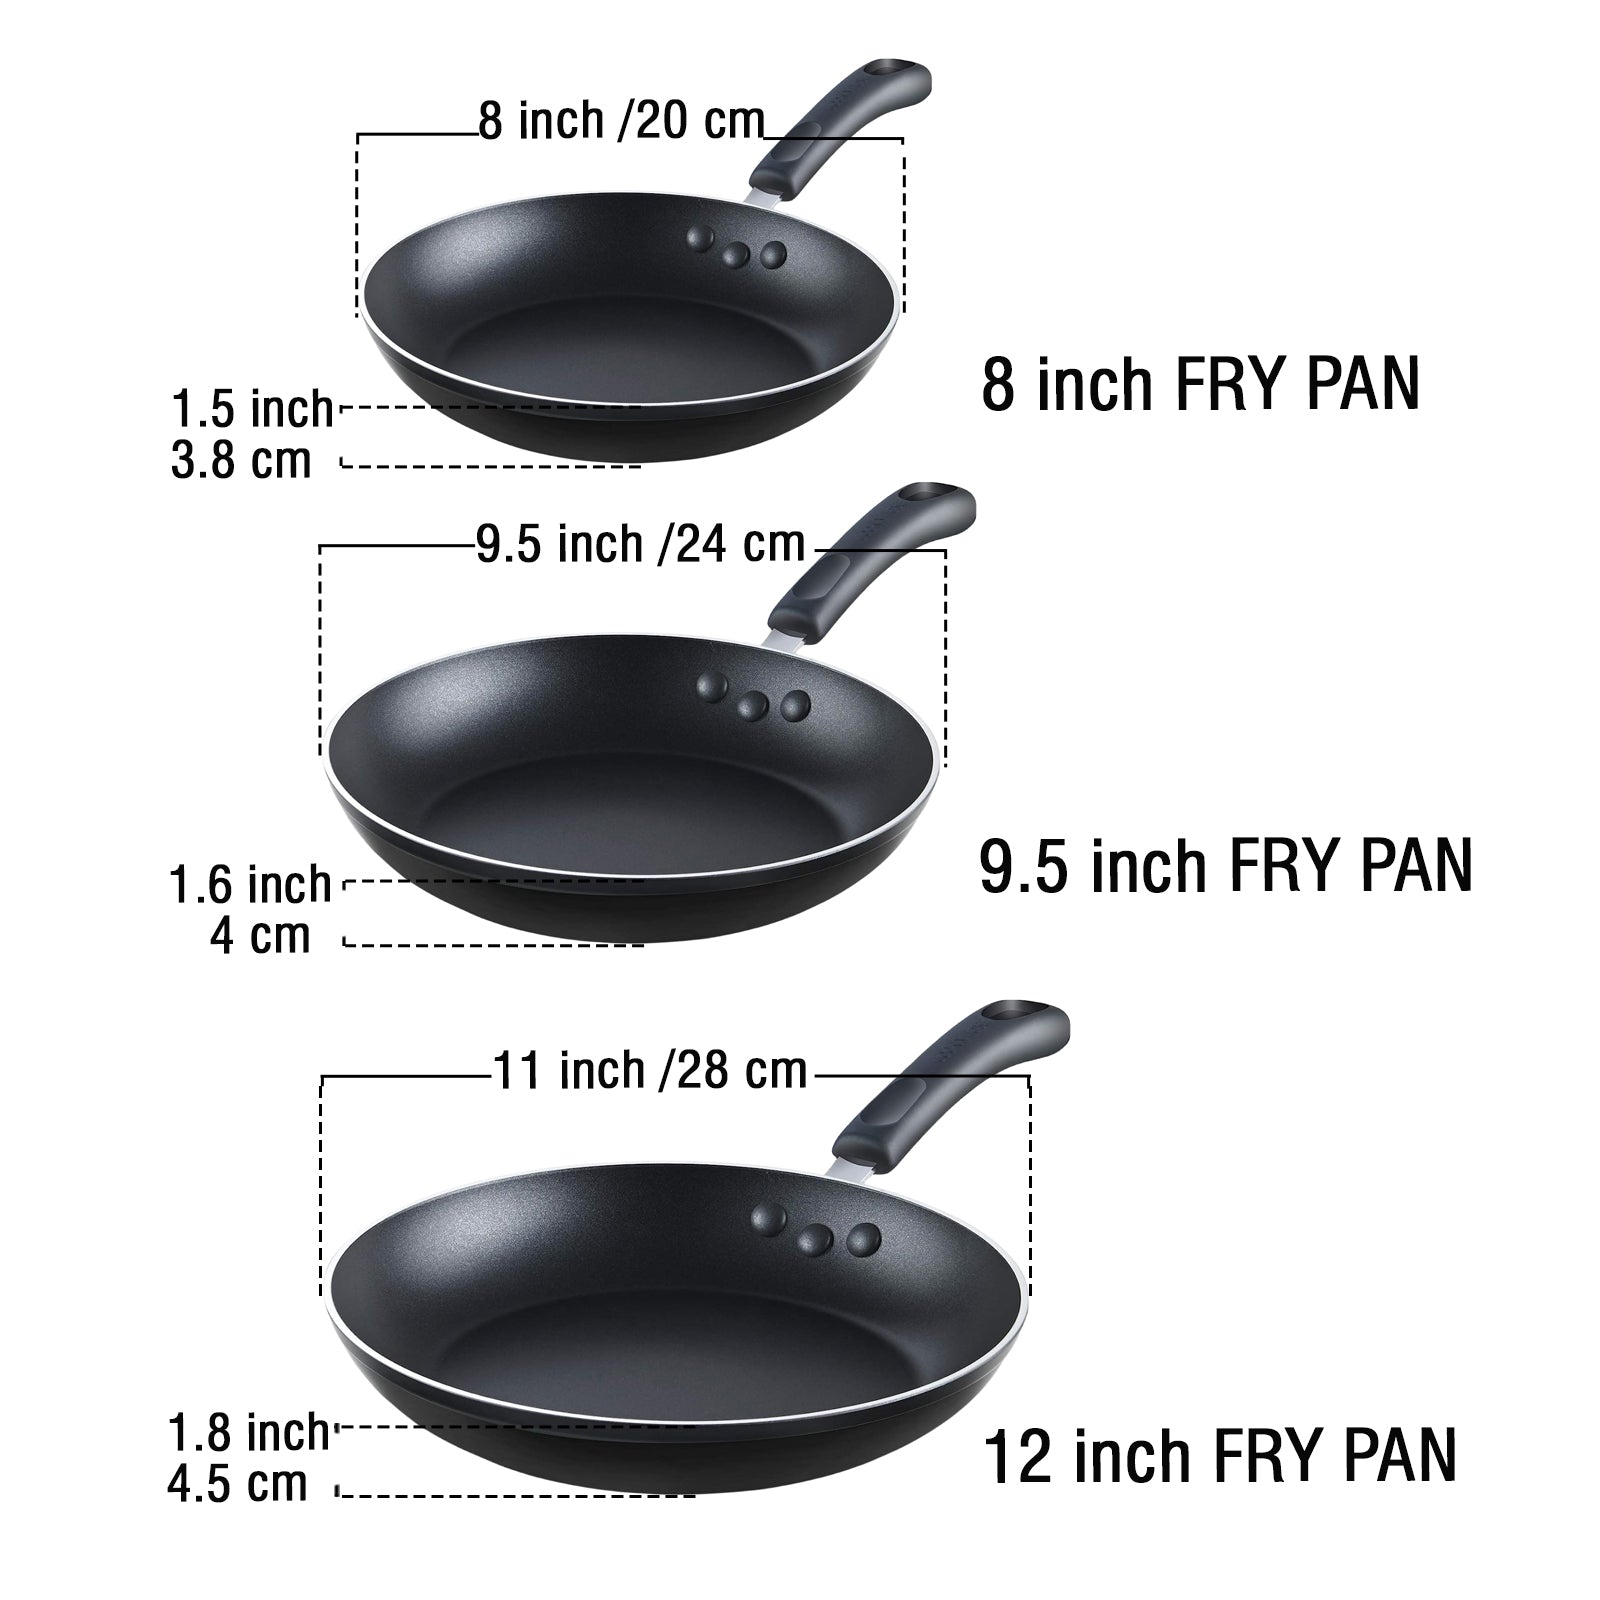 Cook N Home 12 Non Stick Frying Pan